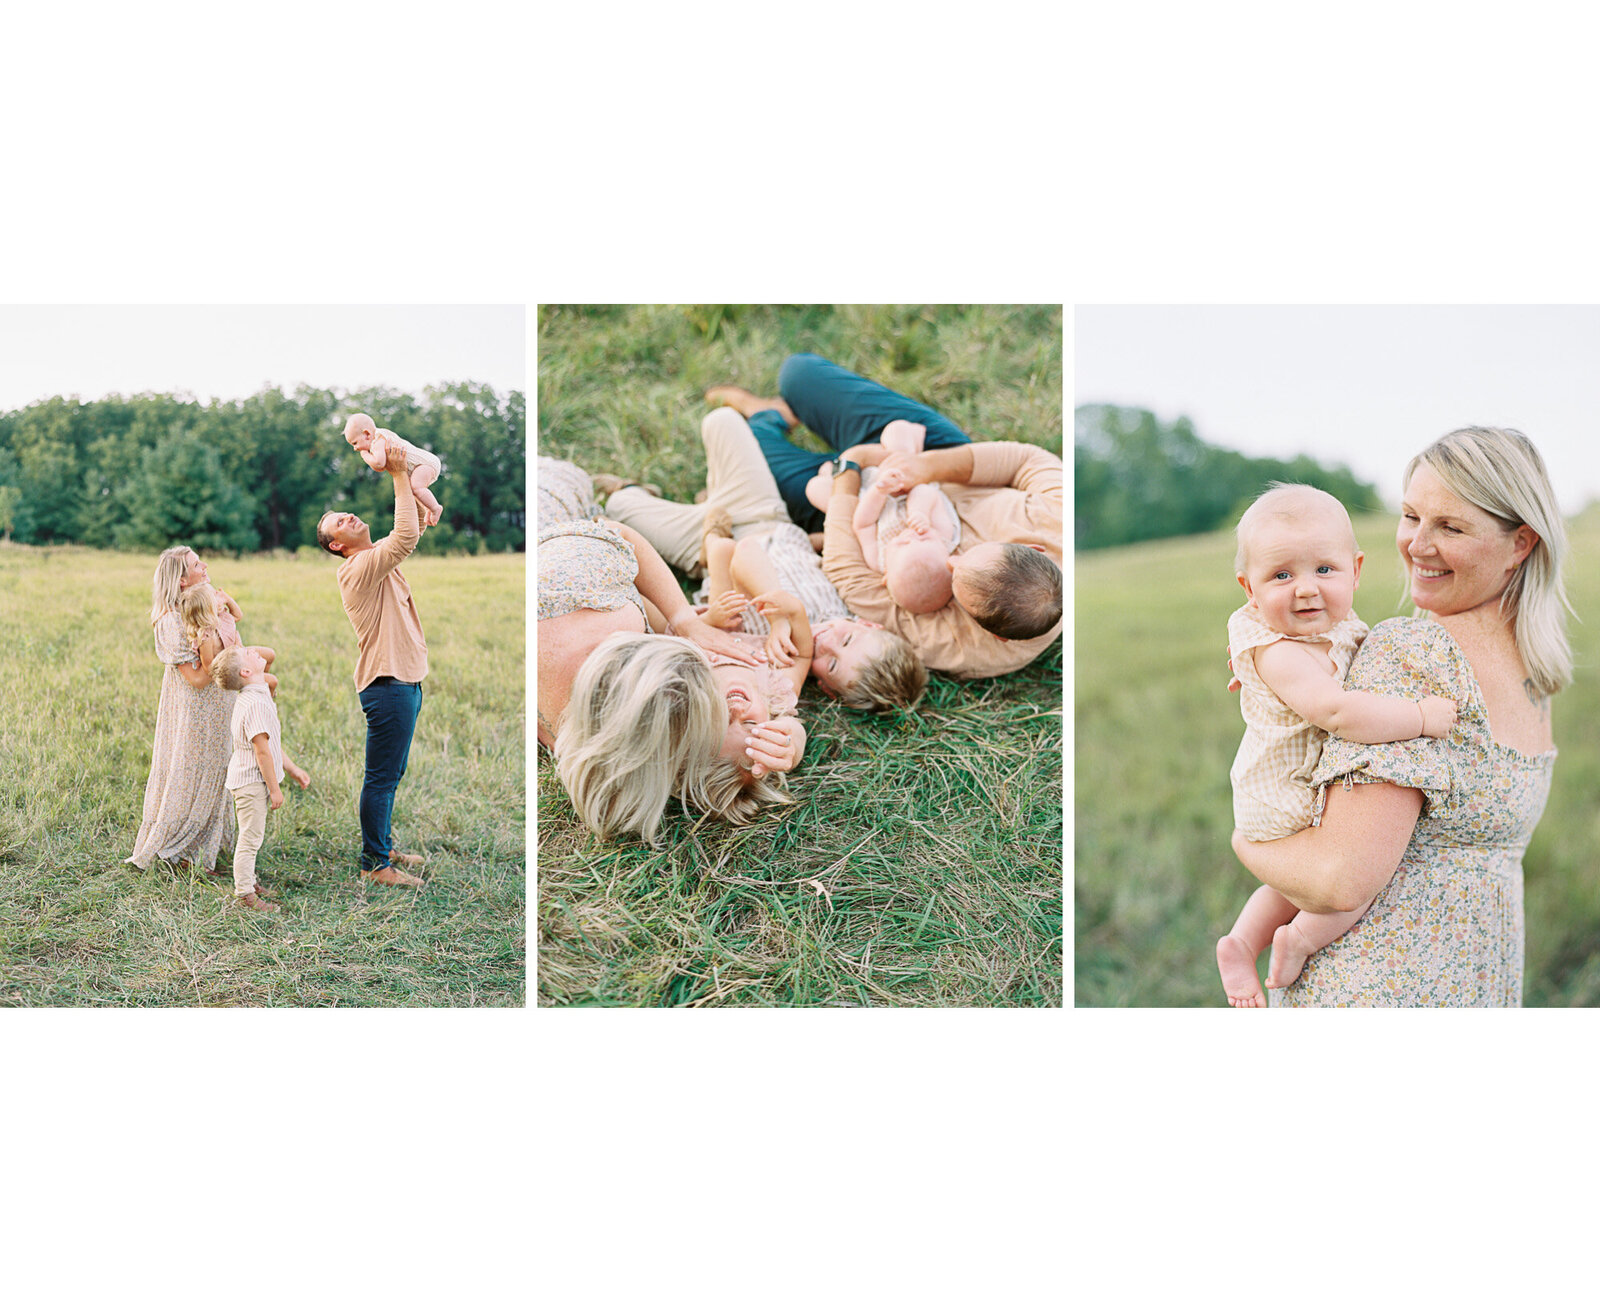 family in high end clothing during summer family session in a grassy field by Madison wi family photographer, Talia Laird Photography